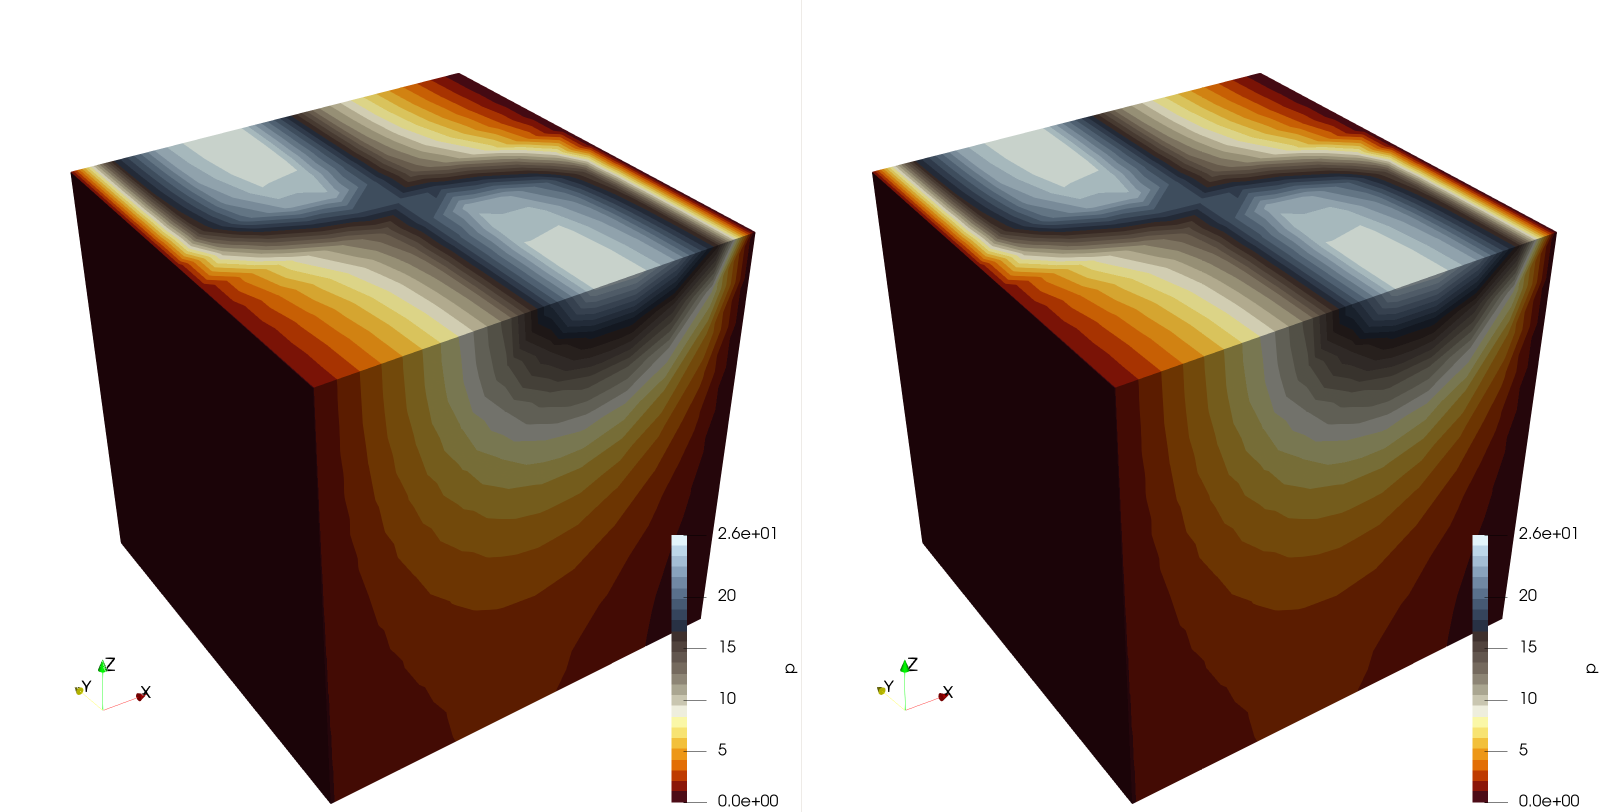 Cube with pressure distribution; left: coarse raster input; right: fine raster
input